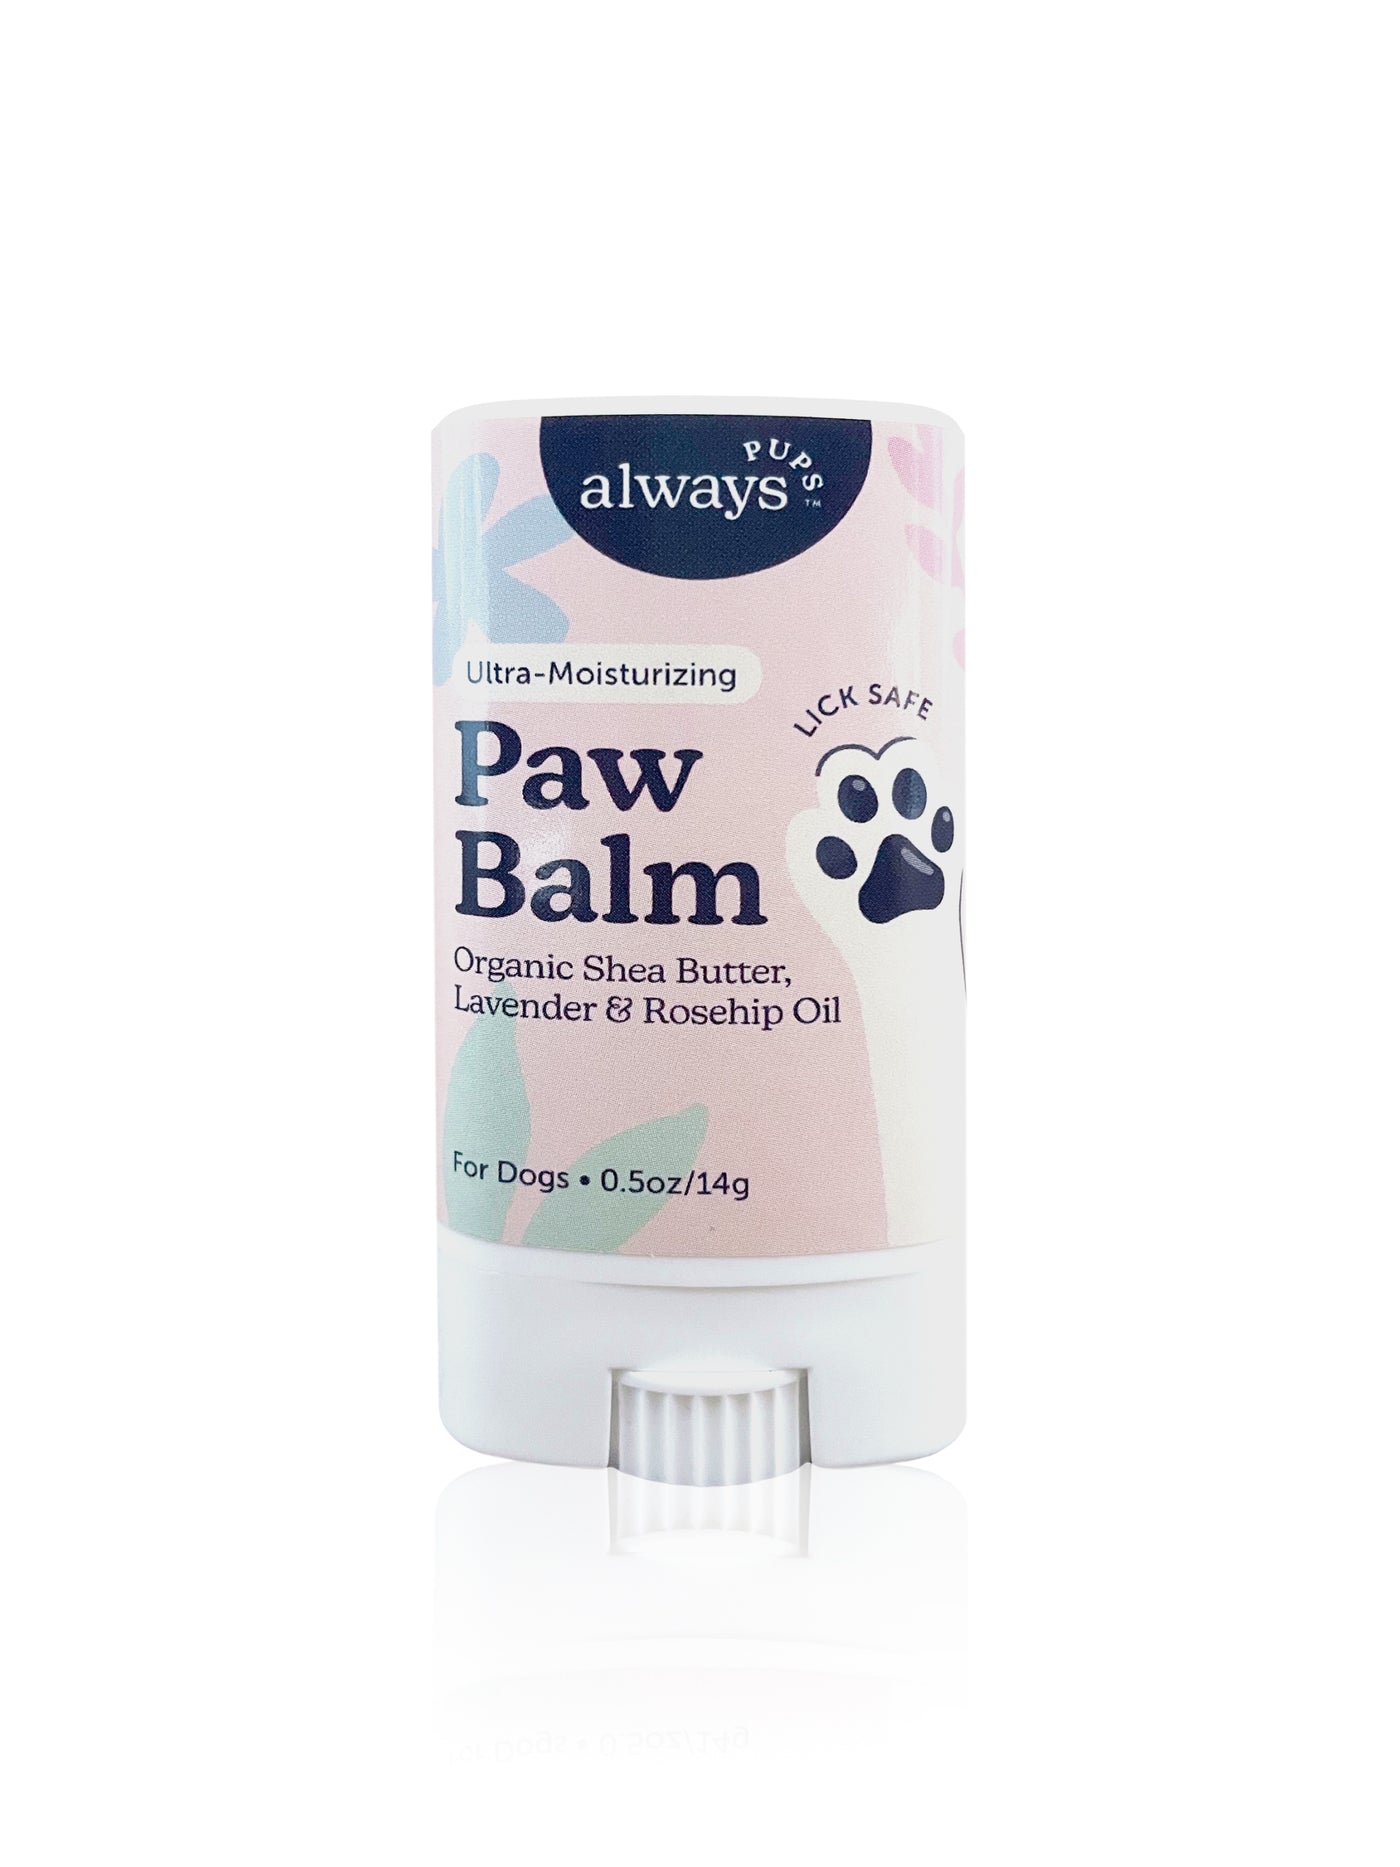 AlwaysPups All Natural Organic Paw Balm for Dogs - 0.5oz in a twist-up tube